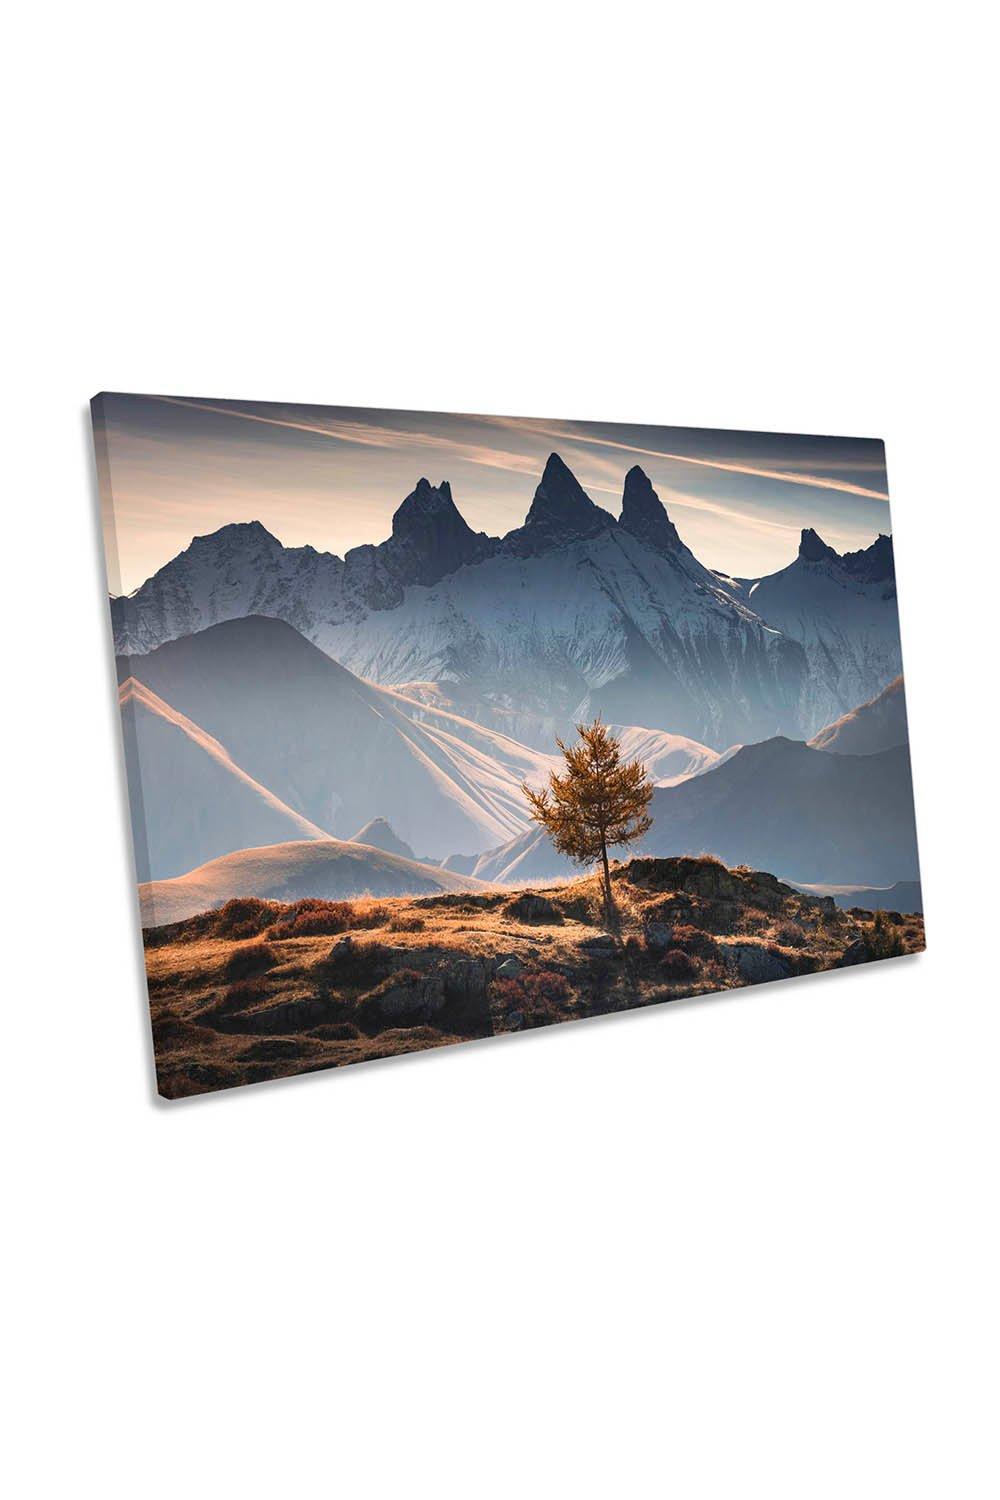 The Needles Alps France Mountains Canvas Wall Art Picture Print